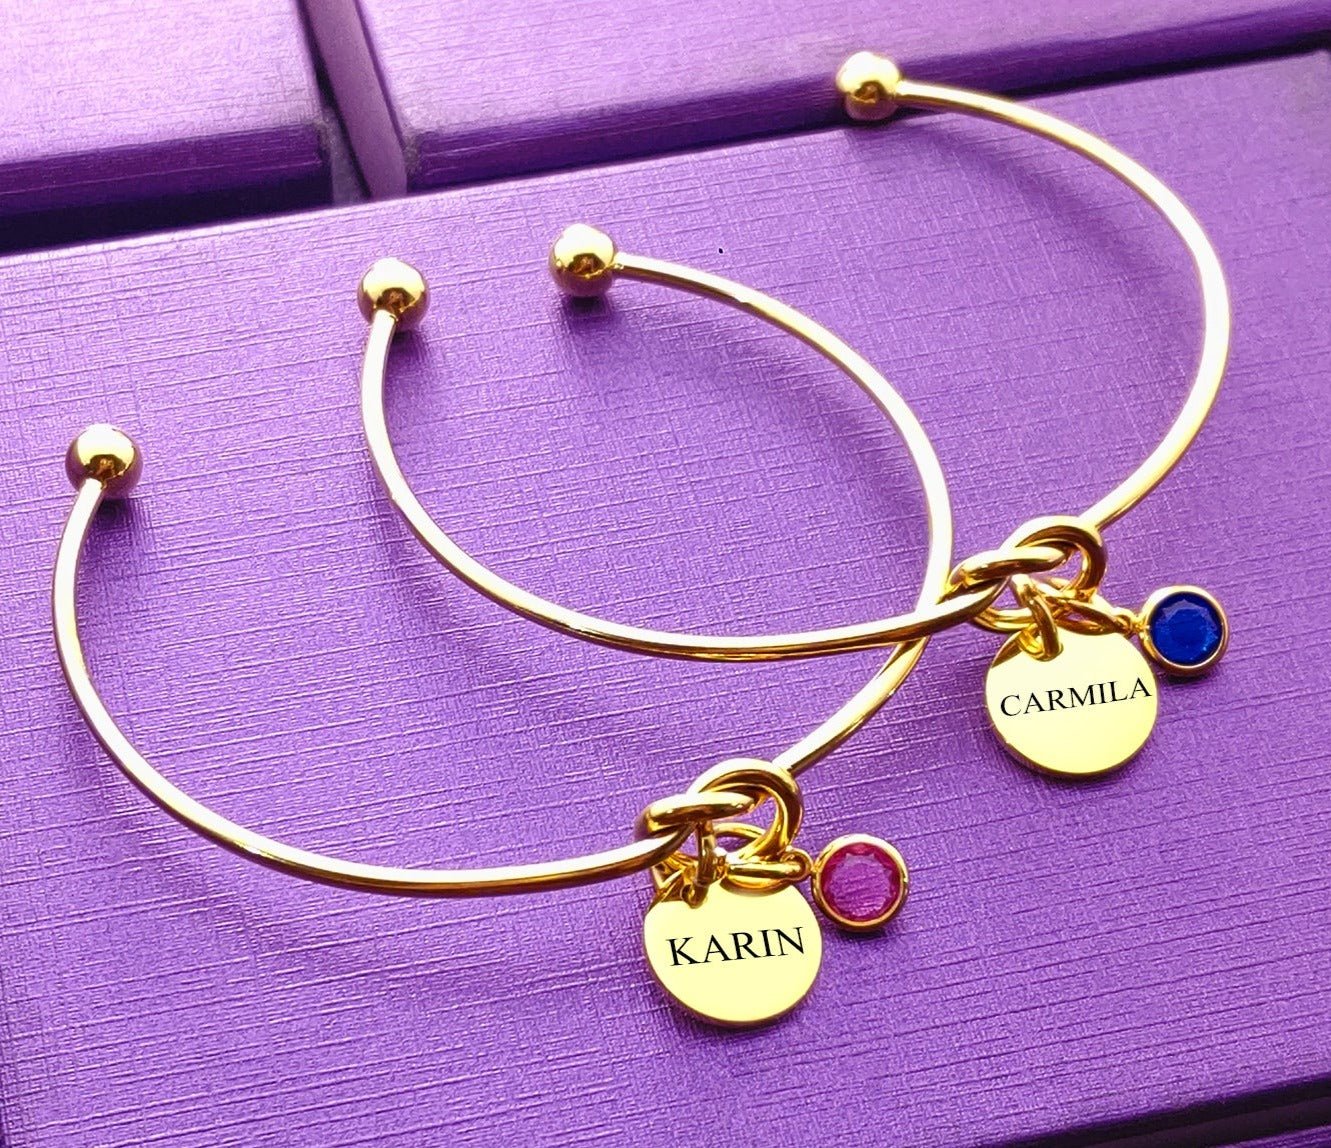 BUY ONE GET ONE Knot Bangle with Disc Charm & Birthstone - Deal